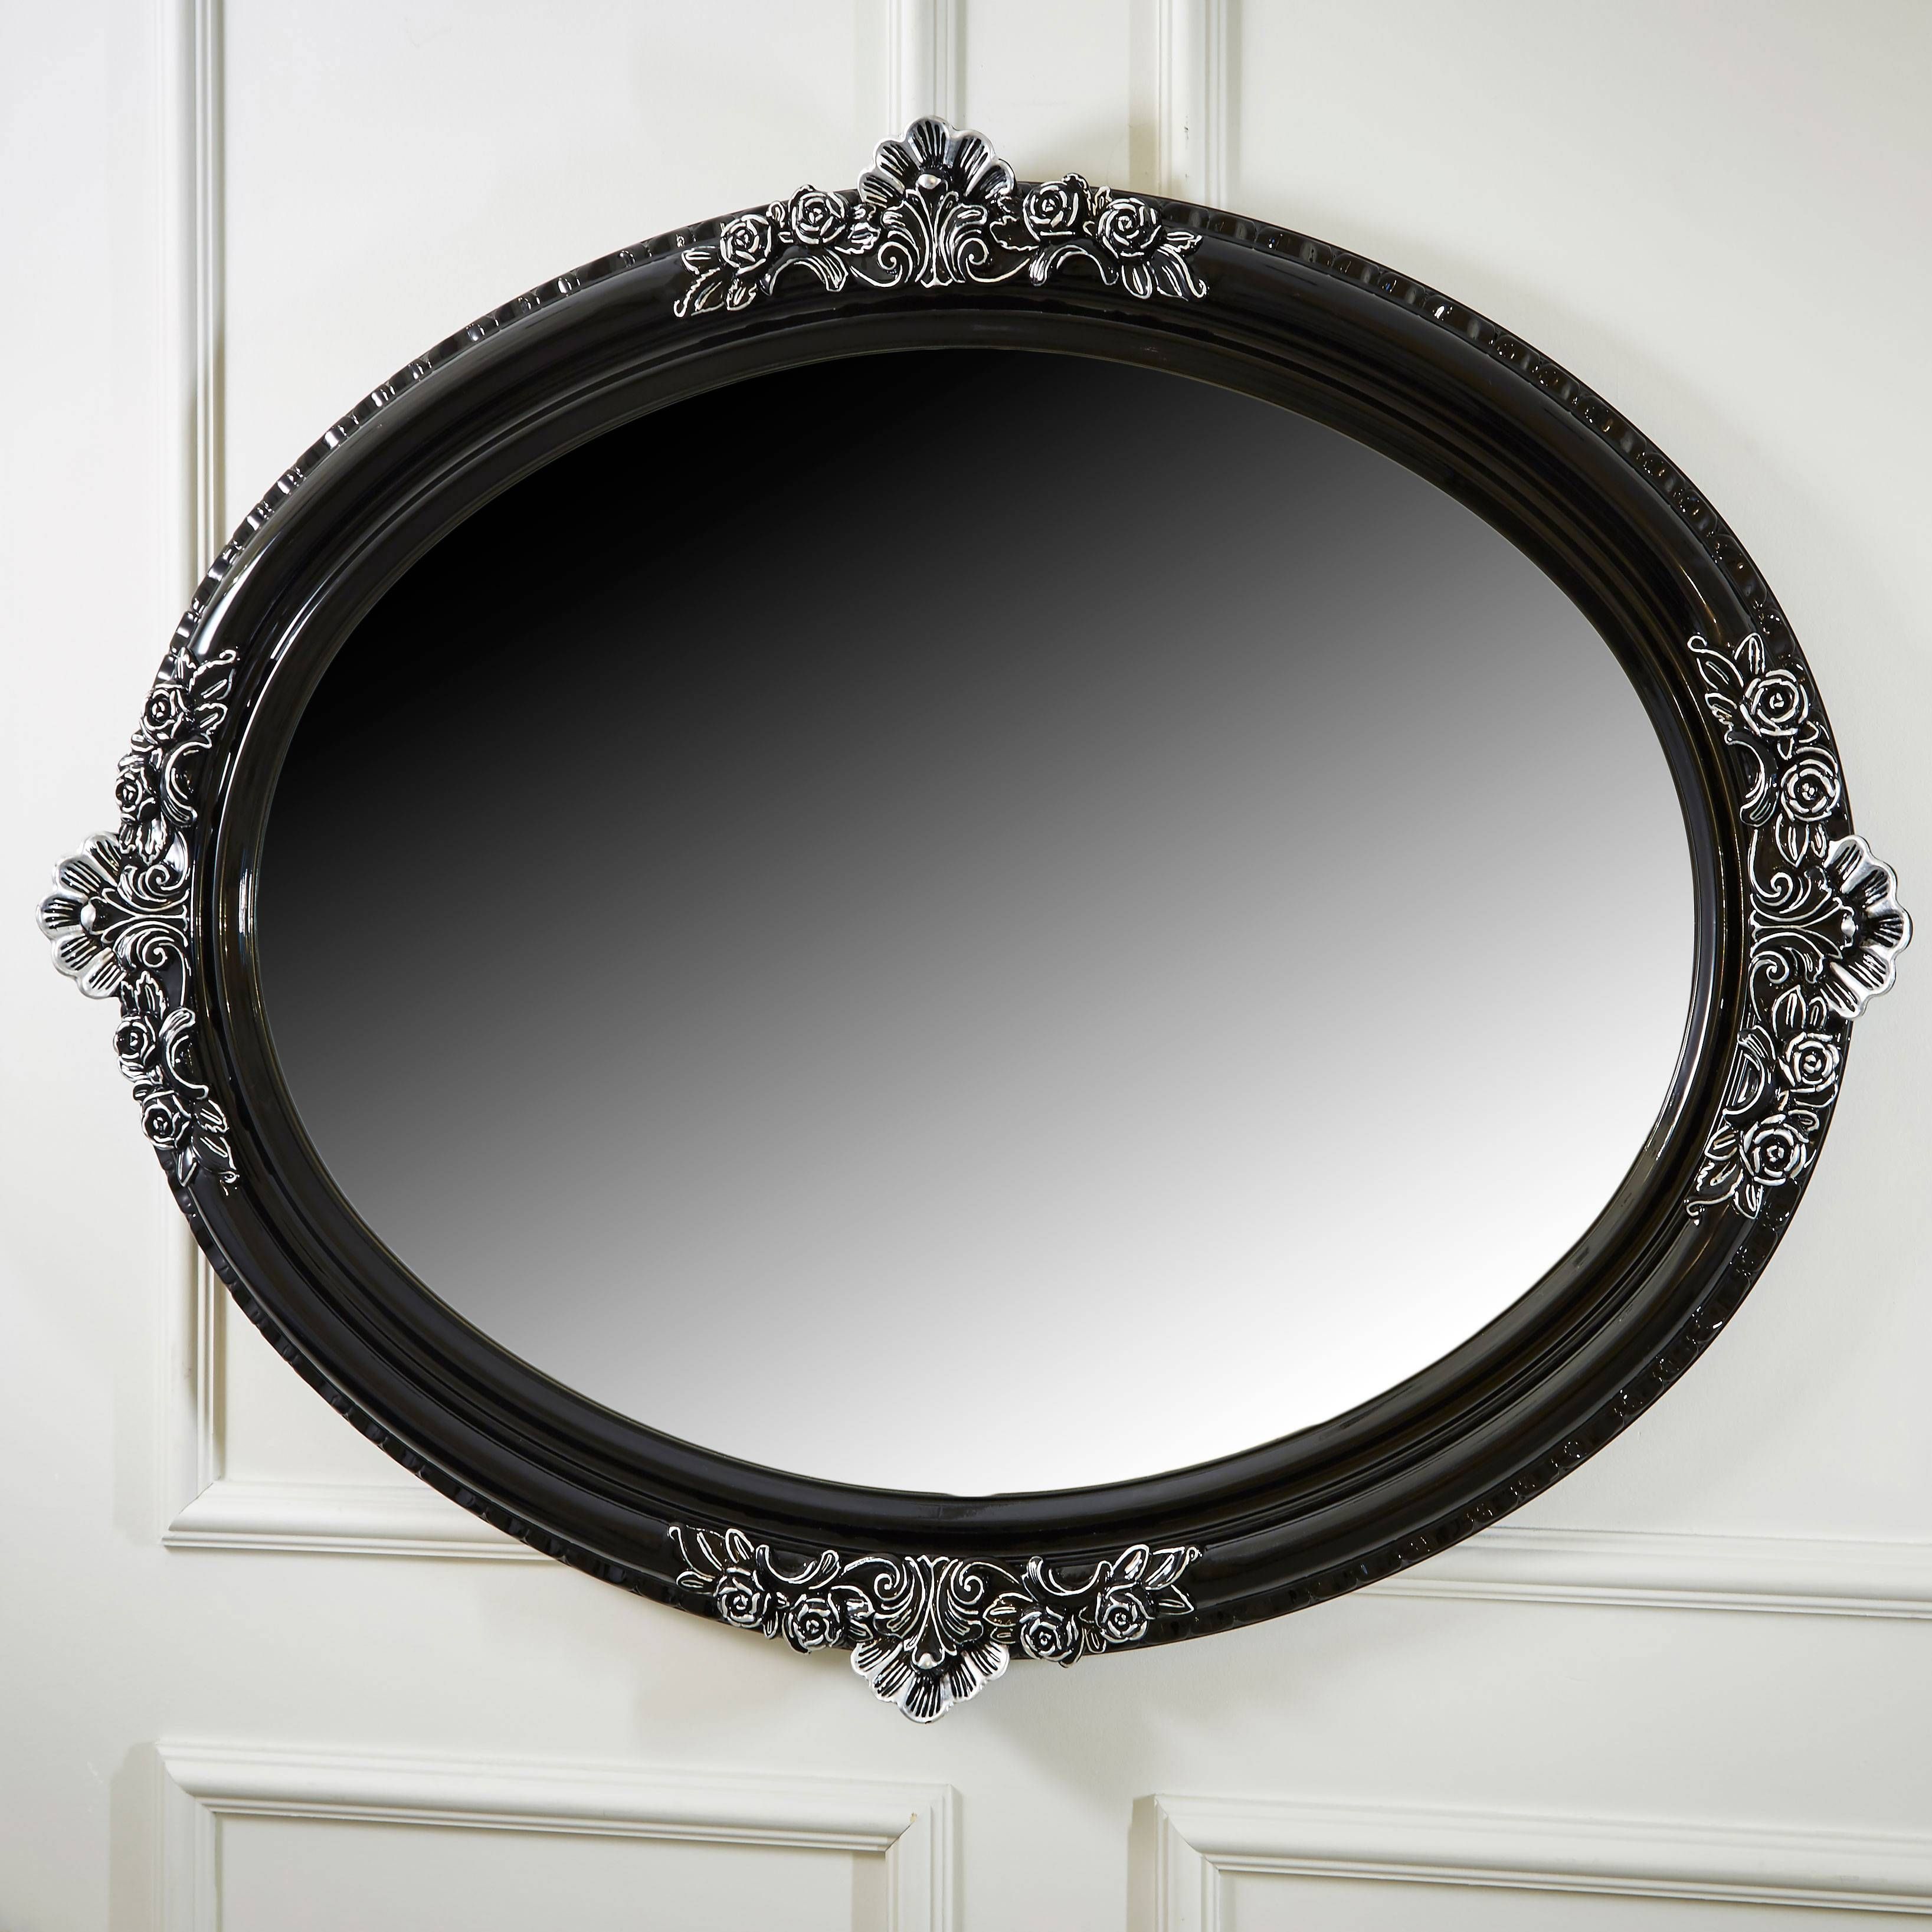 Mirror : Hollywood Regency Mirror Ornate Baroque Victorian The With Regard To Baroque Black Mirrors (View 8 of 15)